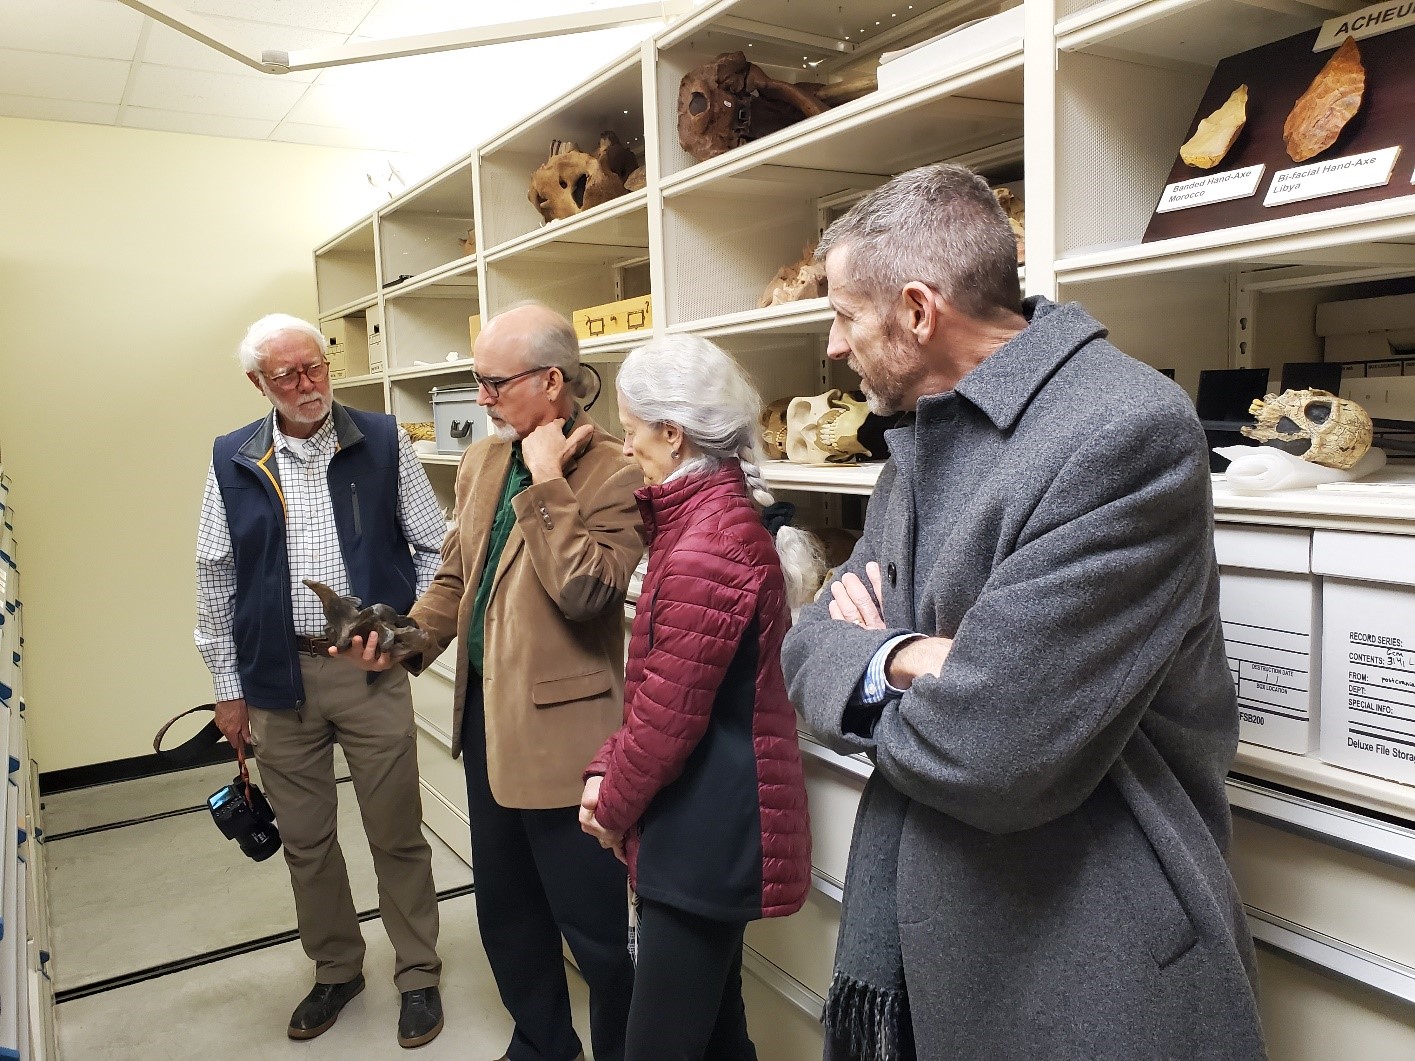 Dr. Clough, Dr. Mead, Ms. Loftman and Dean Tenbus discuss cervical vertebrae from Giant Bison recovered from Georgia (H. Mead)